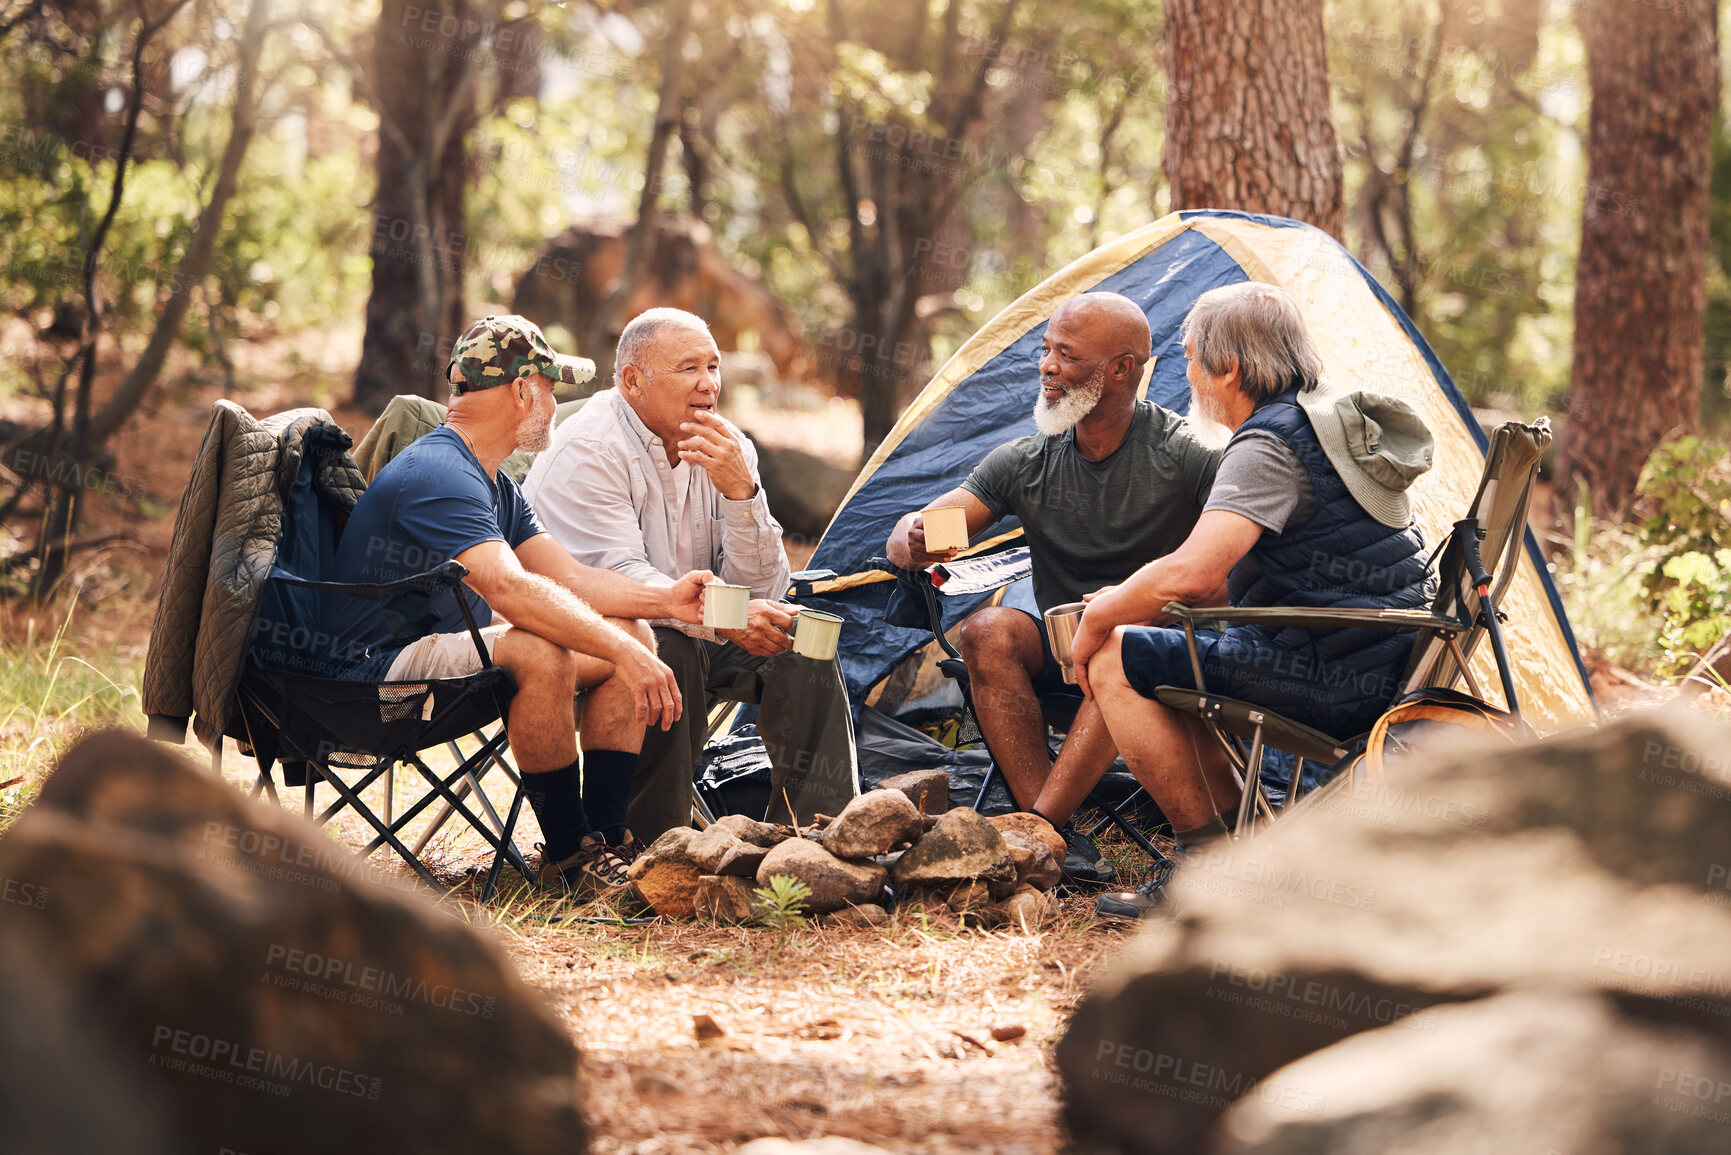 Buy stock photo Senior people, camping and relaxing in nature for travel, adventure or summer vacation together on chairs by tent in forest. Group of elderly men talking, enjoying camp out conversation in the woods